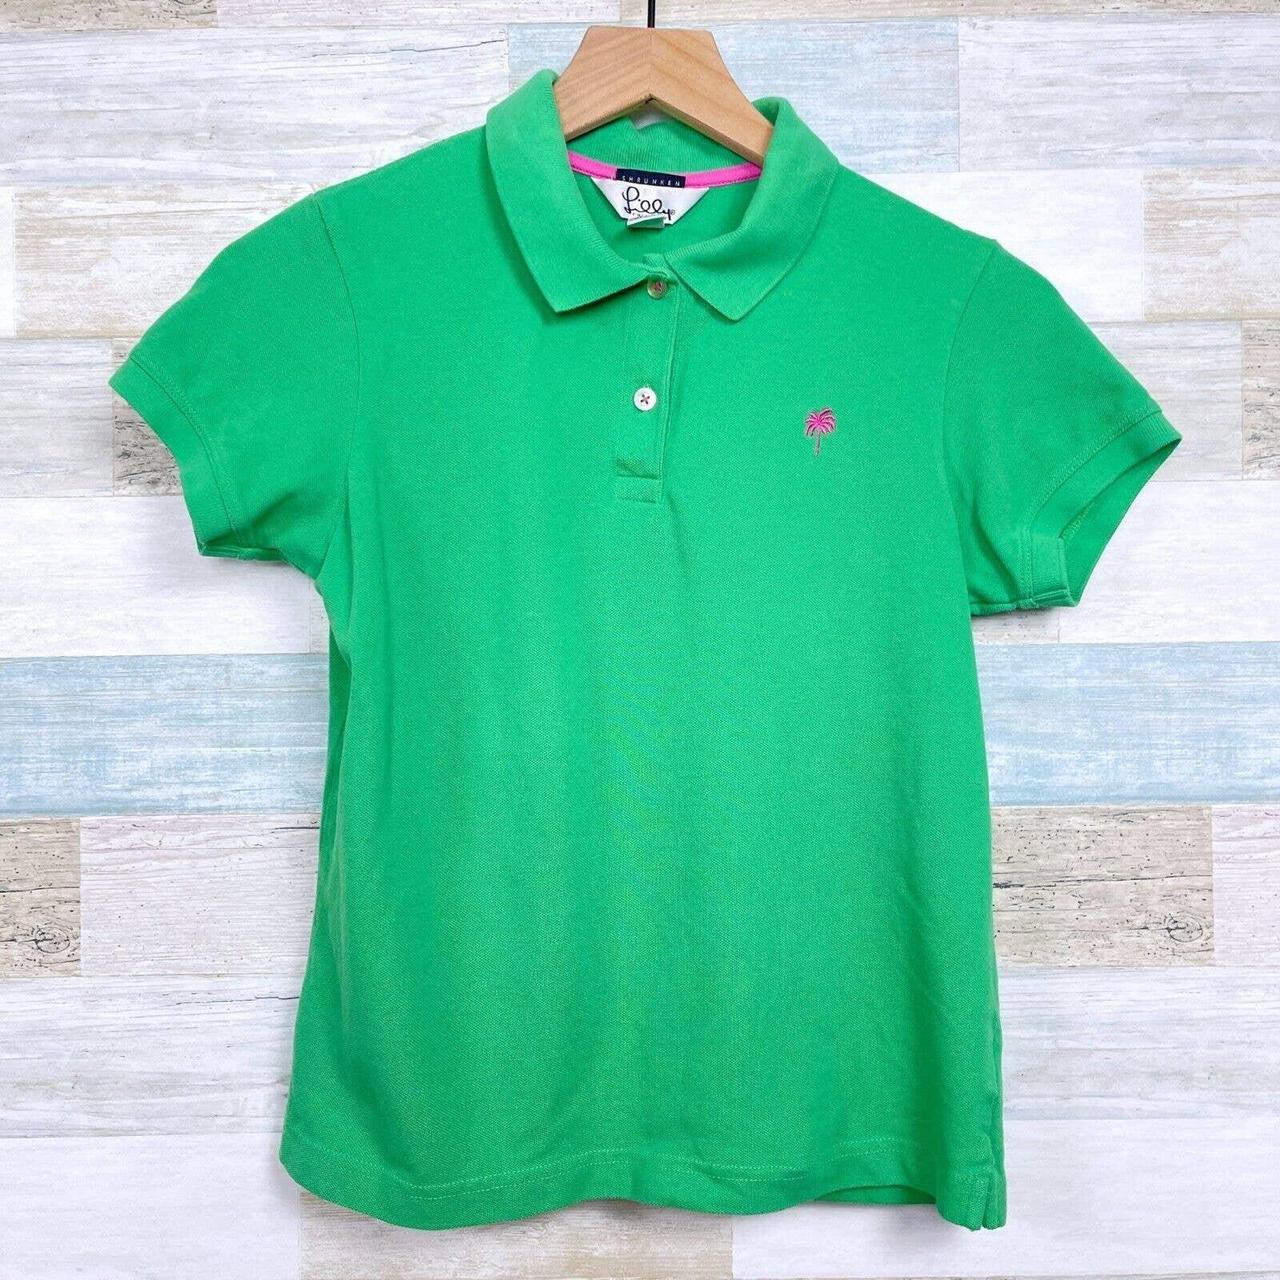 Lilly Pulitzer Women's Green Polo-shirts | Depop